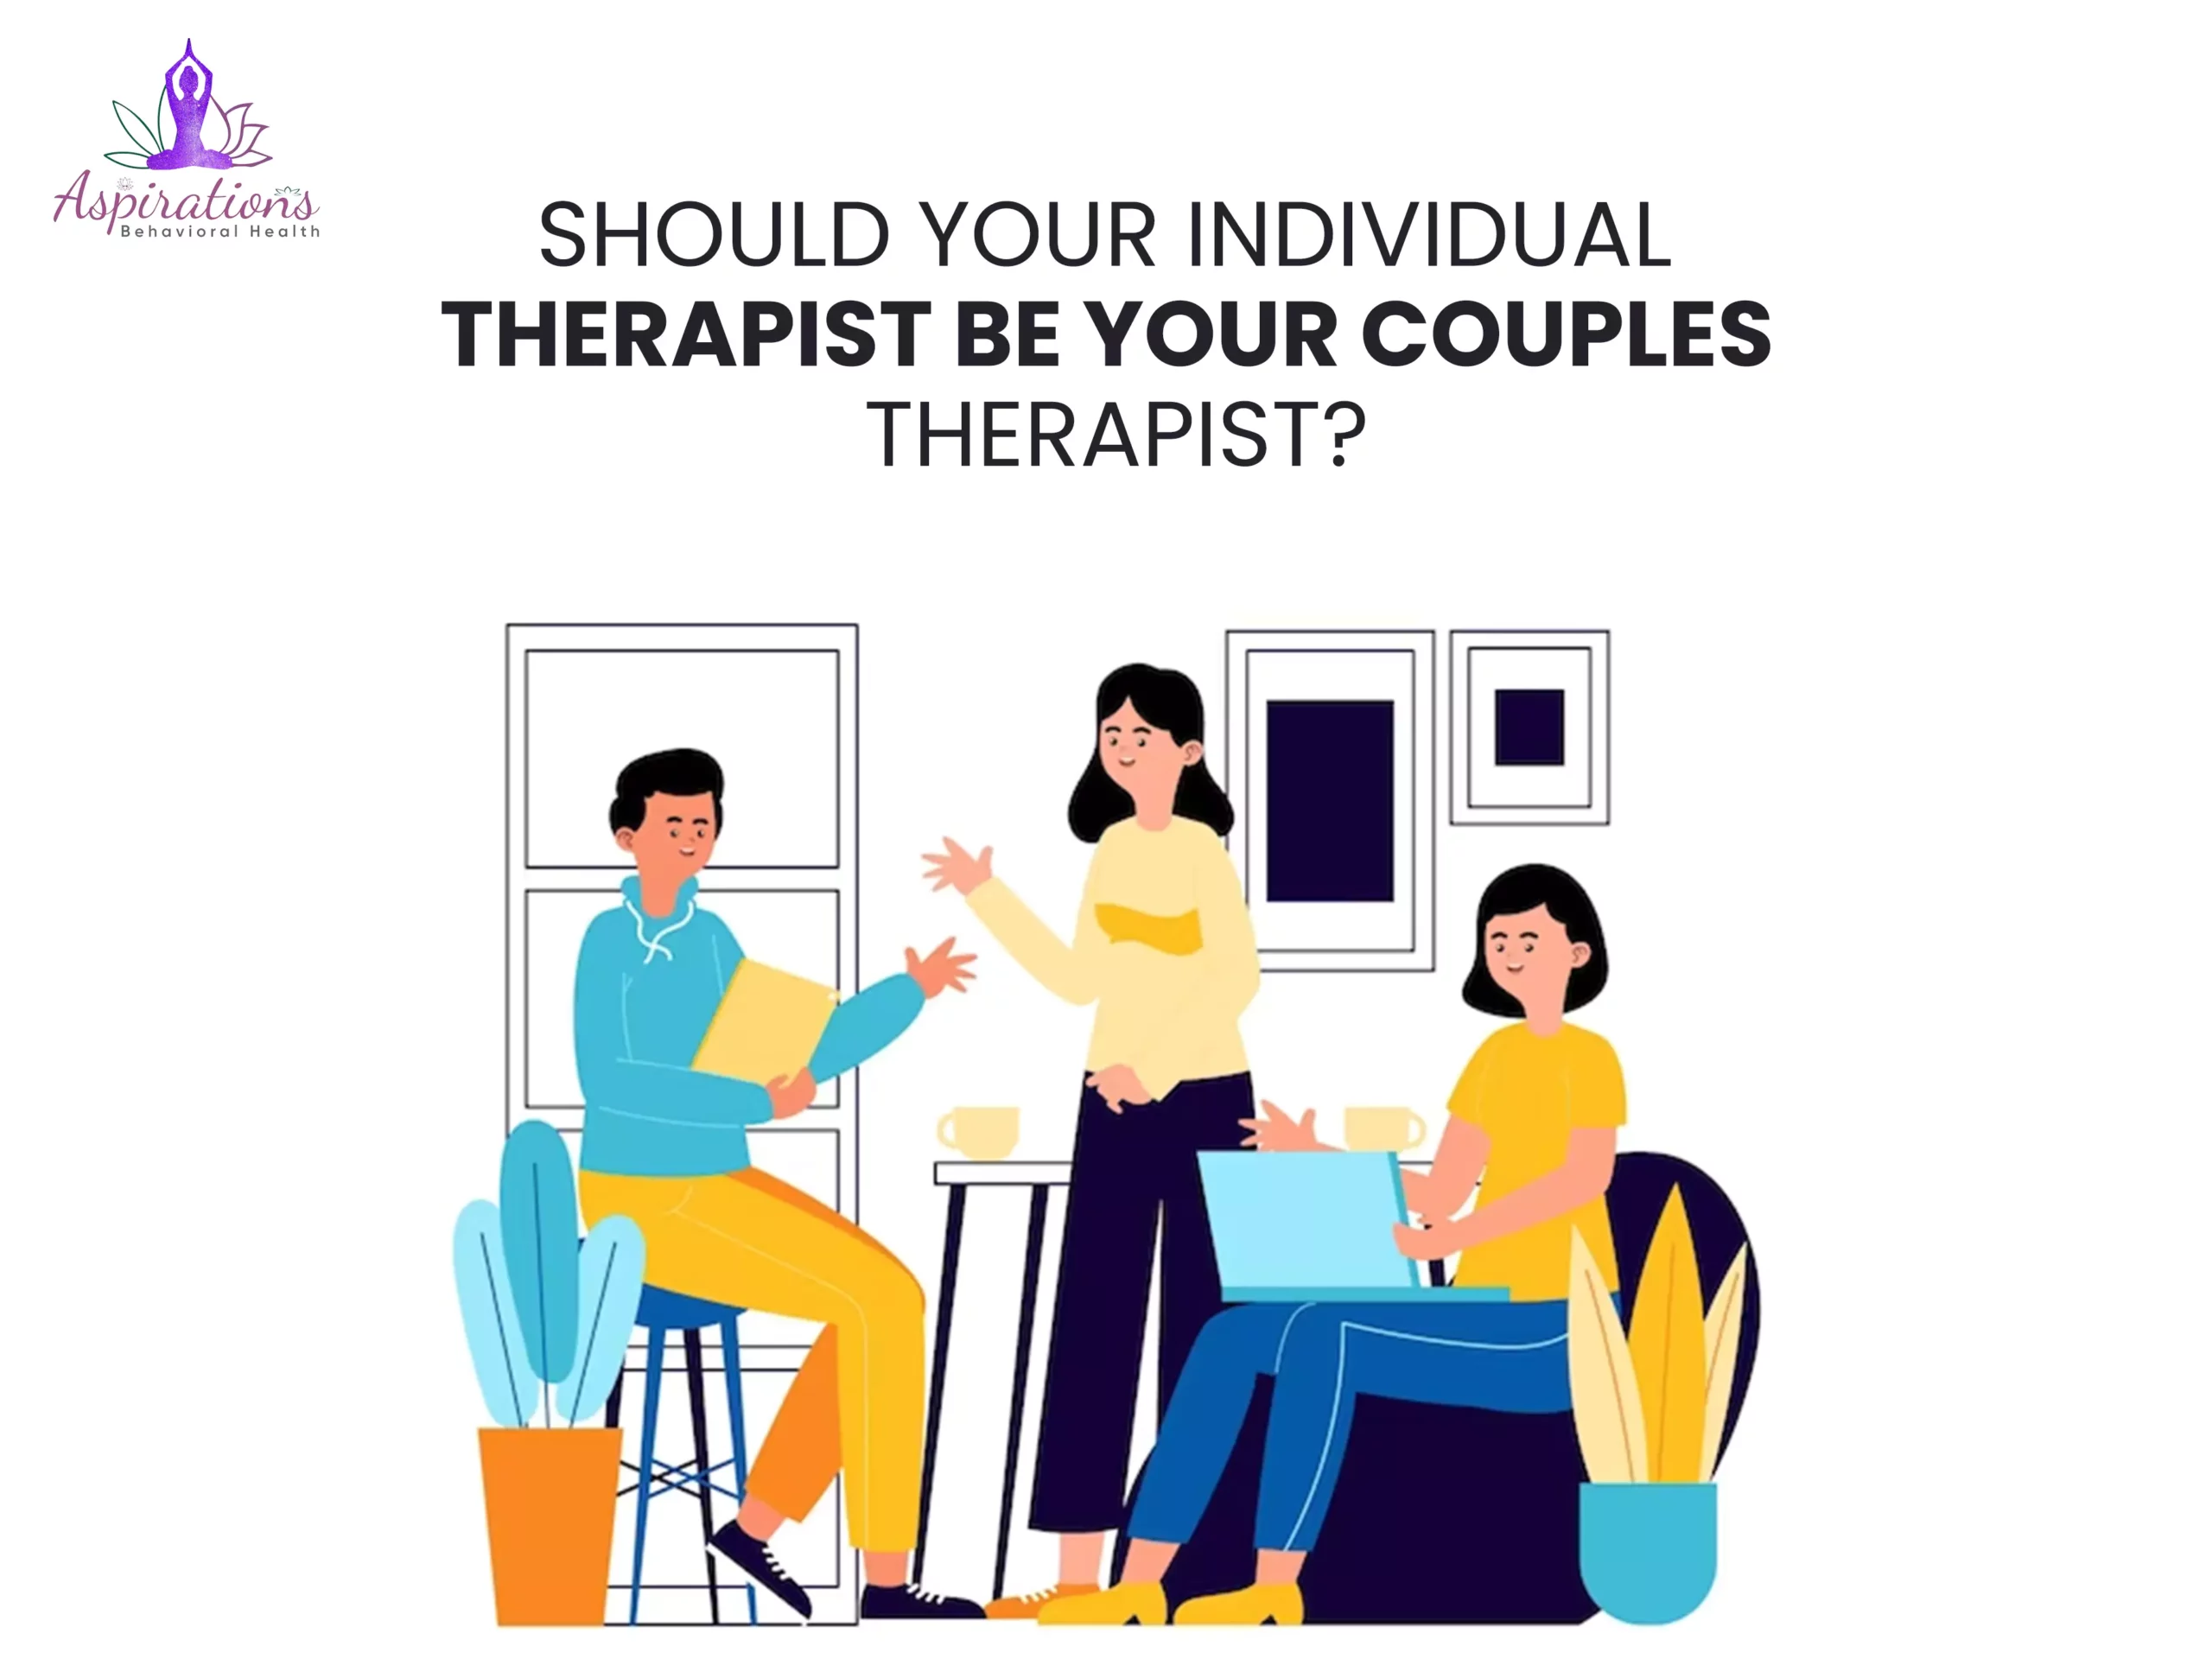 Should Your Individual Therapist Be Your Couples Therapist?